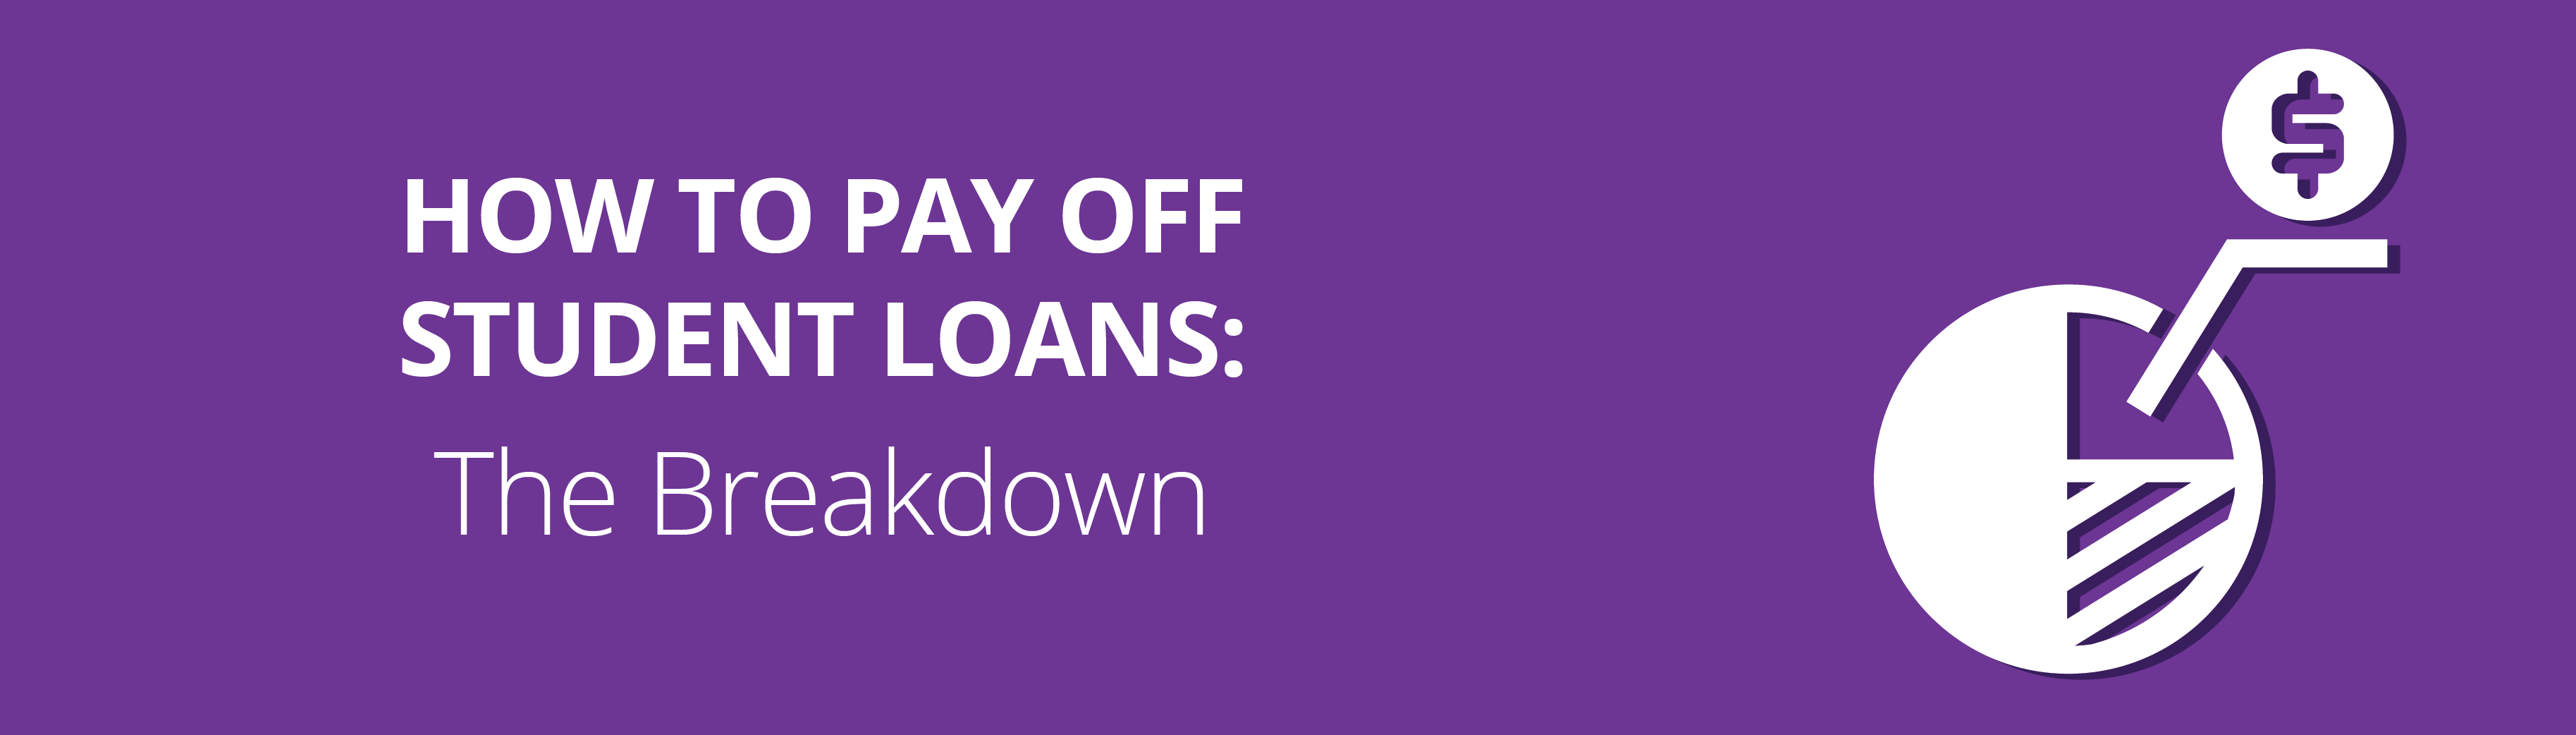 how-to-pay-off-student-loans-the-breakdown-featured-877x250-01